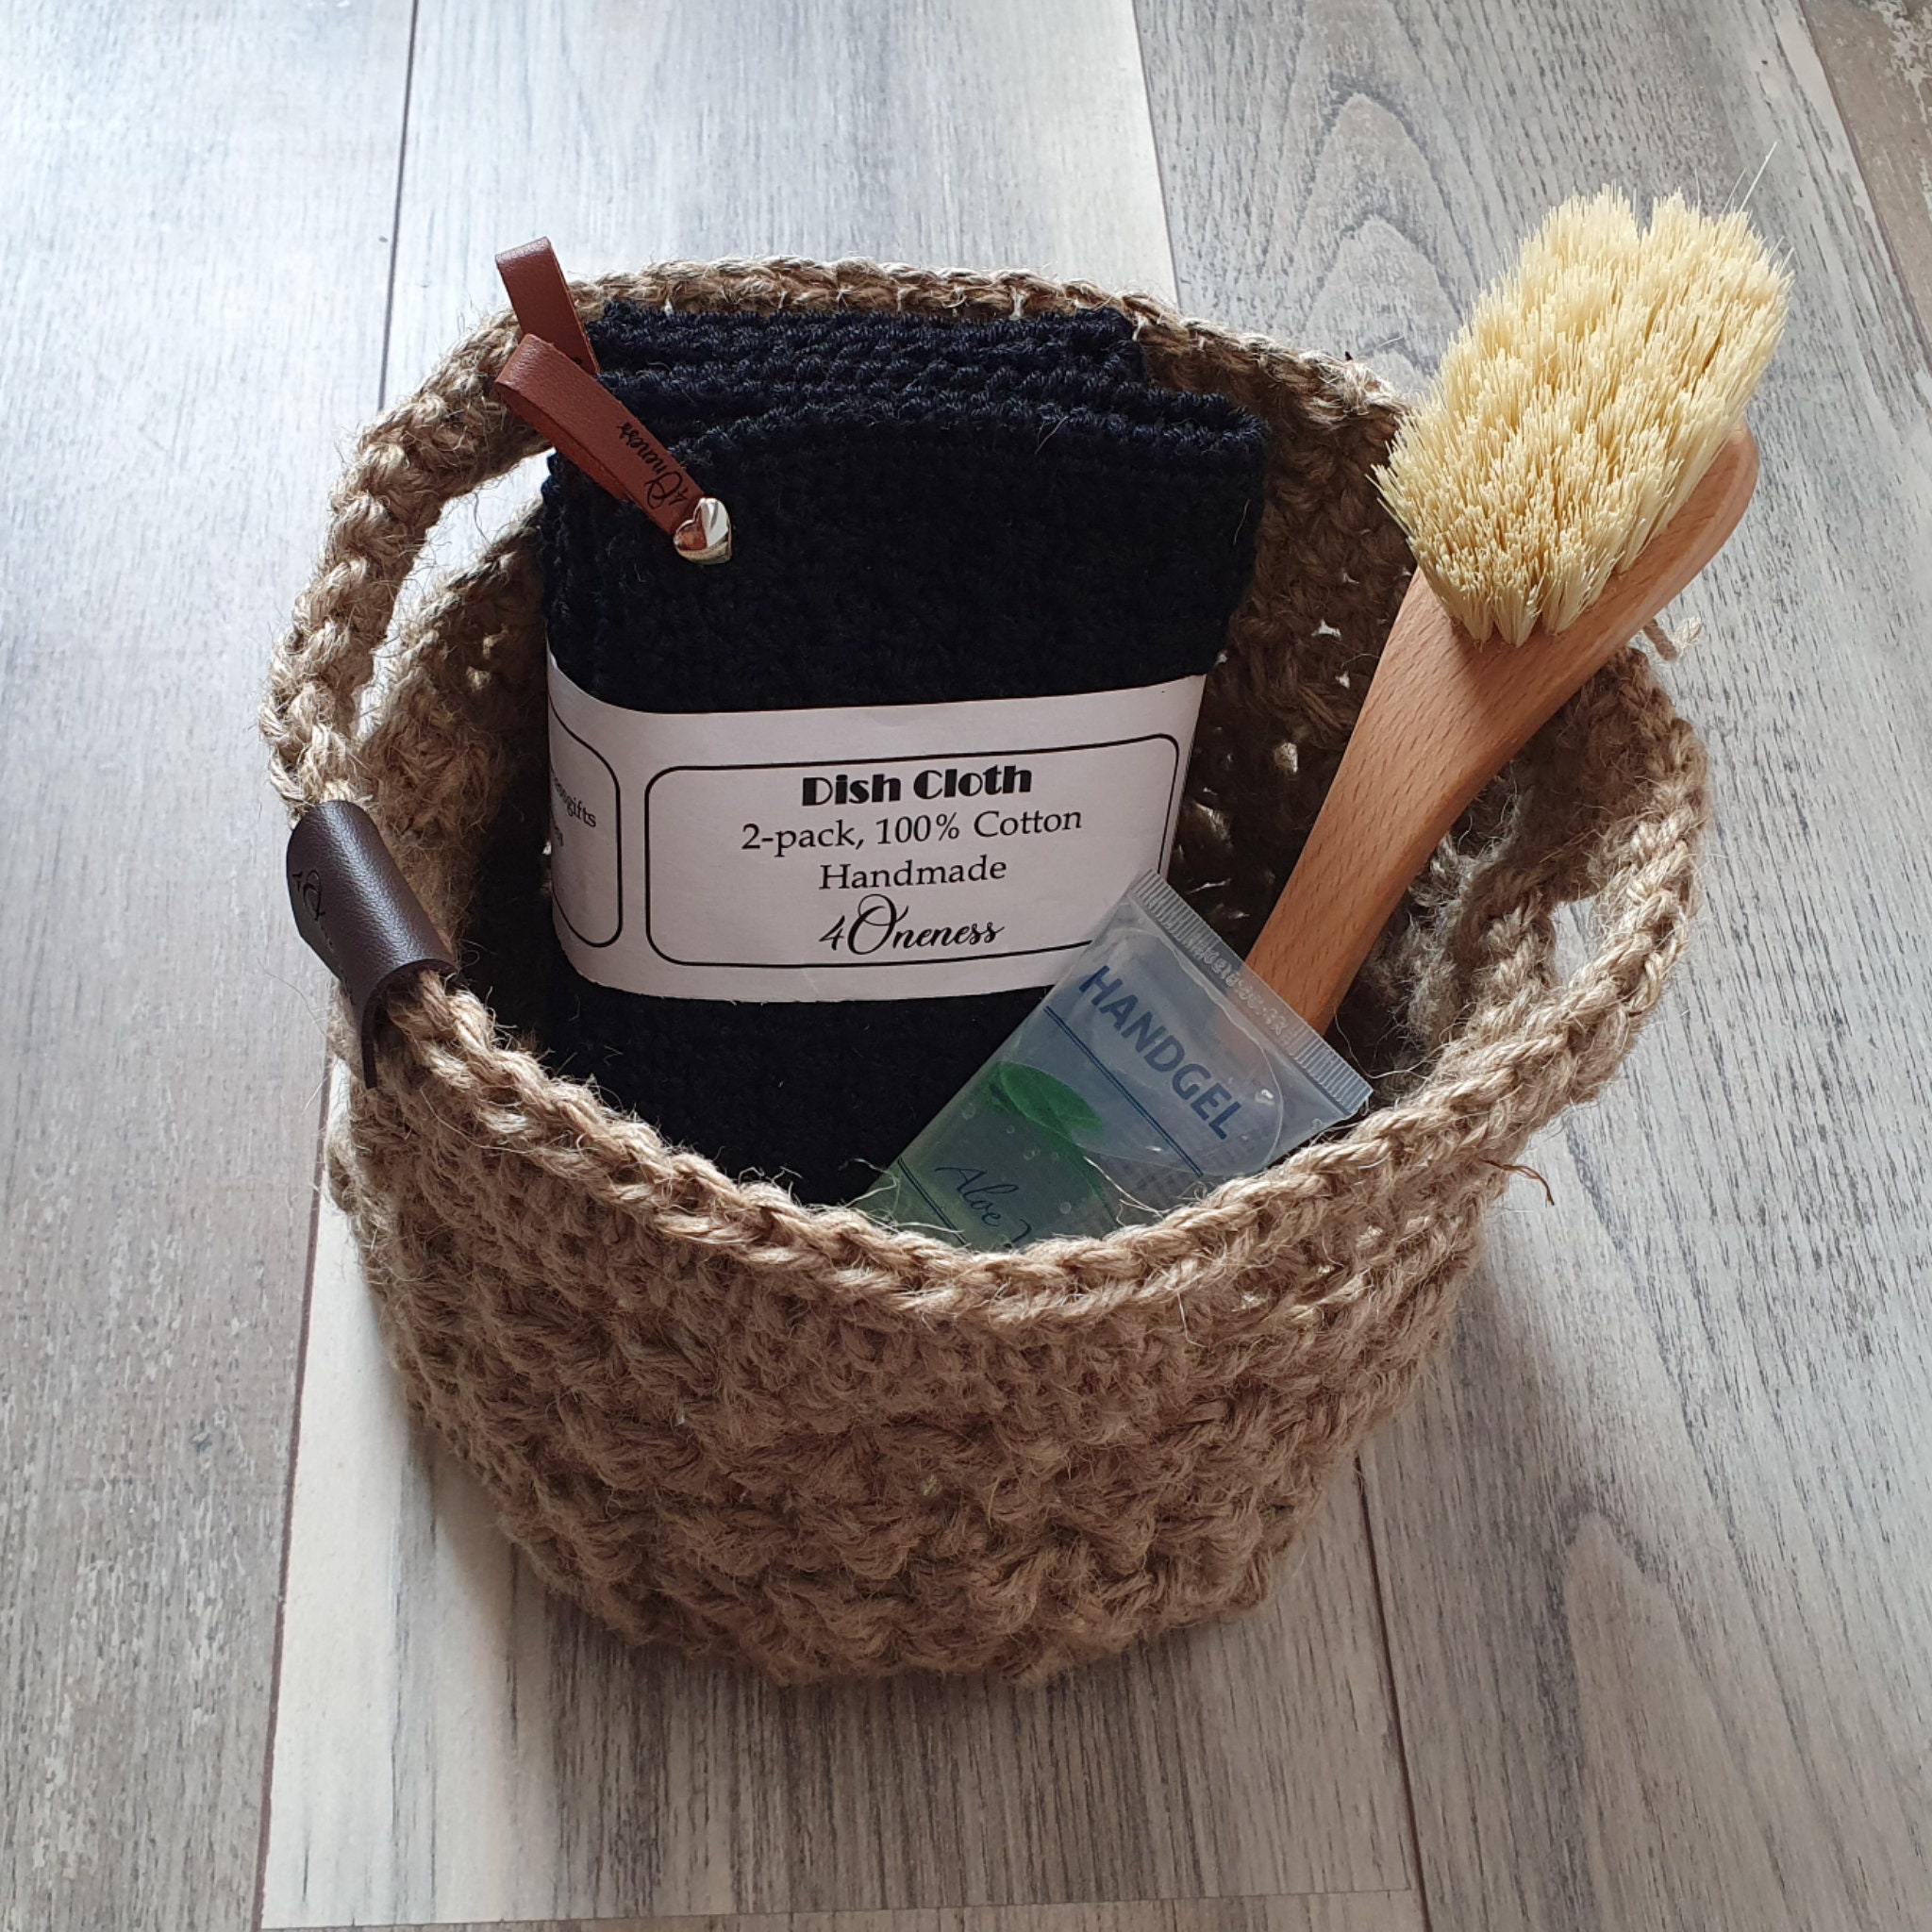 How to Make a Crochet Basket for Plants - A BOX OF TWINE